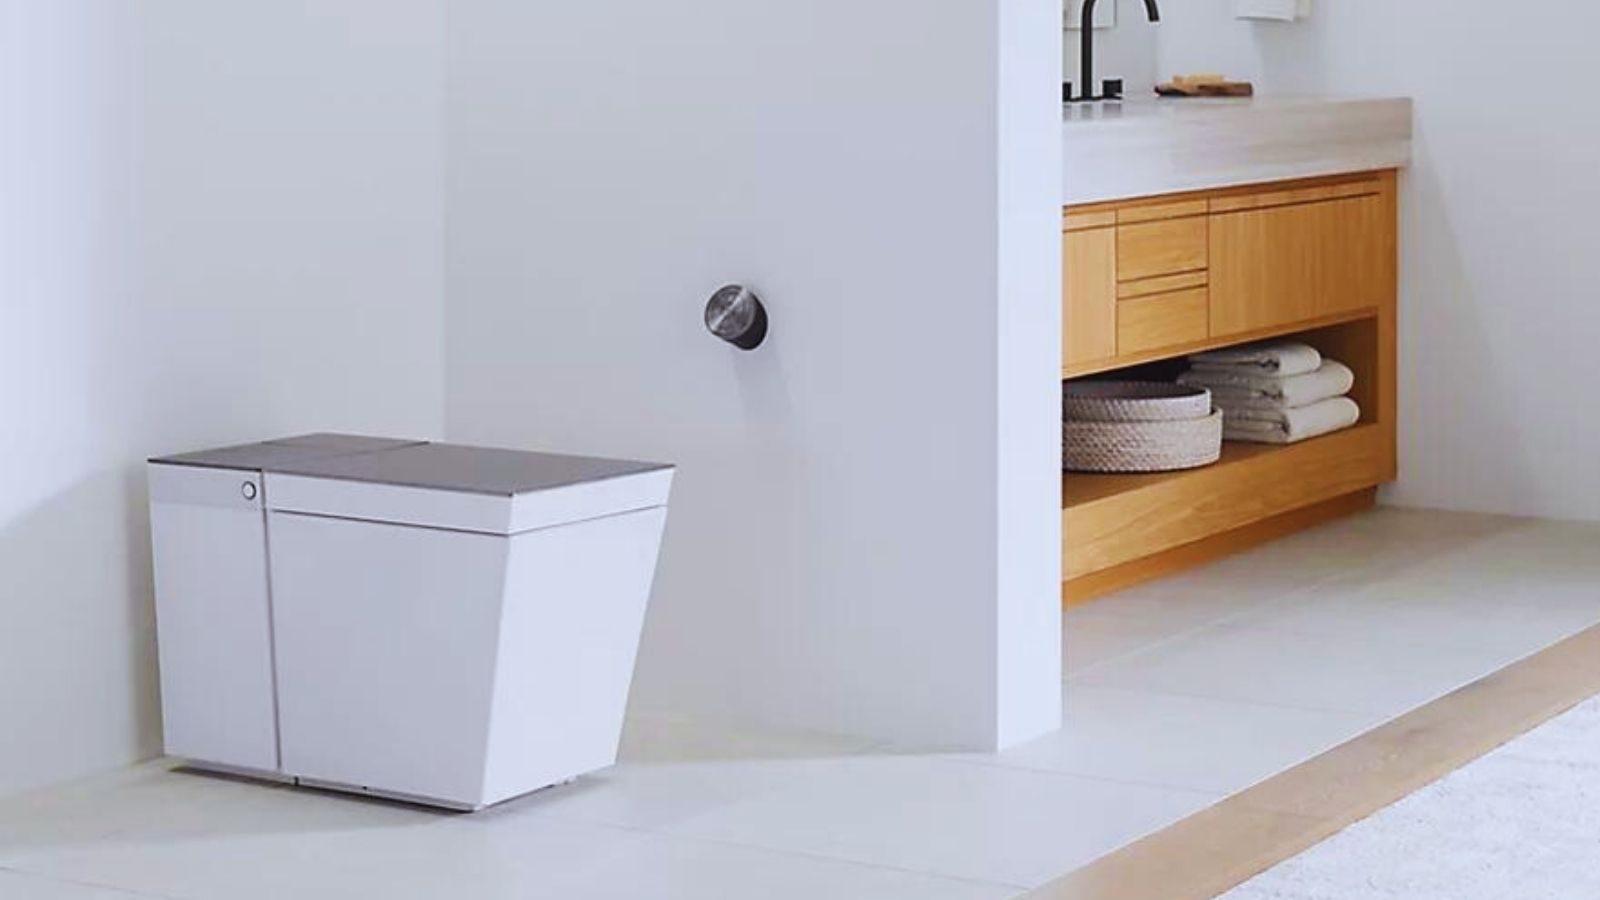 Smart and stylish: Kohler’s Numi 2.0 redefines the modern bathroom experience